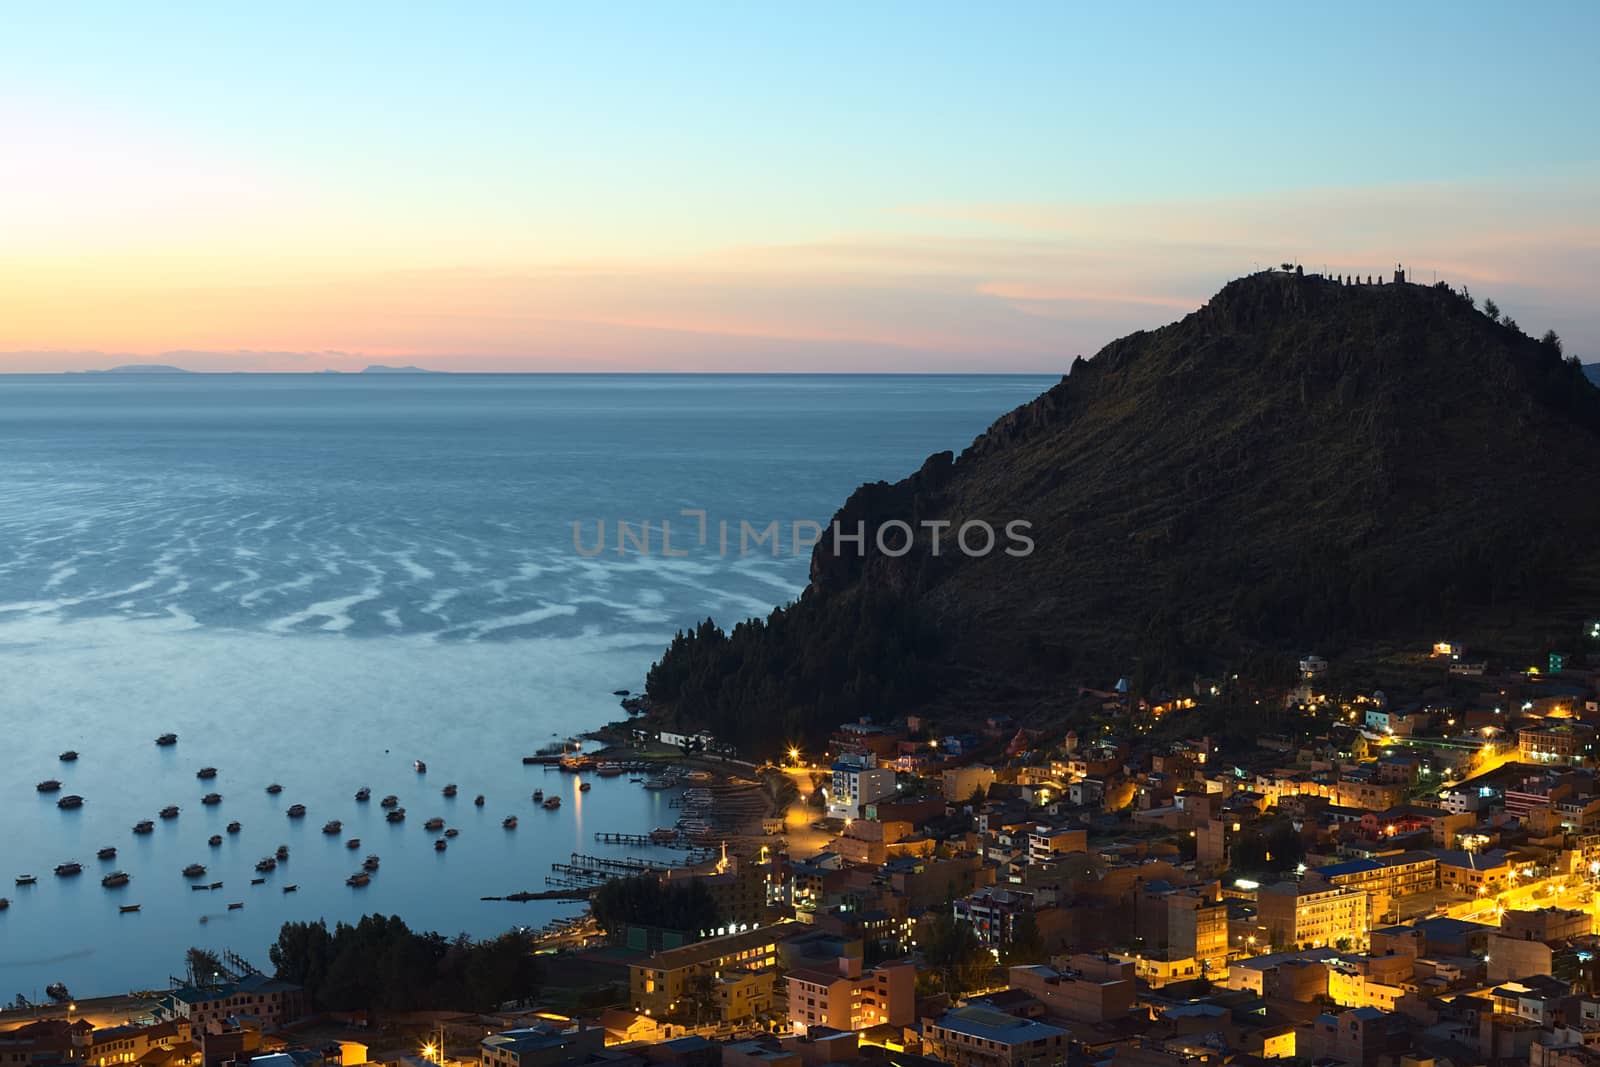 COPACABANA, BOLIVIA - OCTOBER 24, 2014: View shortly after sunset over the small touristy town of Copacabana and Lake Titicaca photographed from Kesanani hill on October 24, 2014 in Copacabana, Bolivia